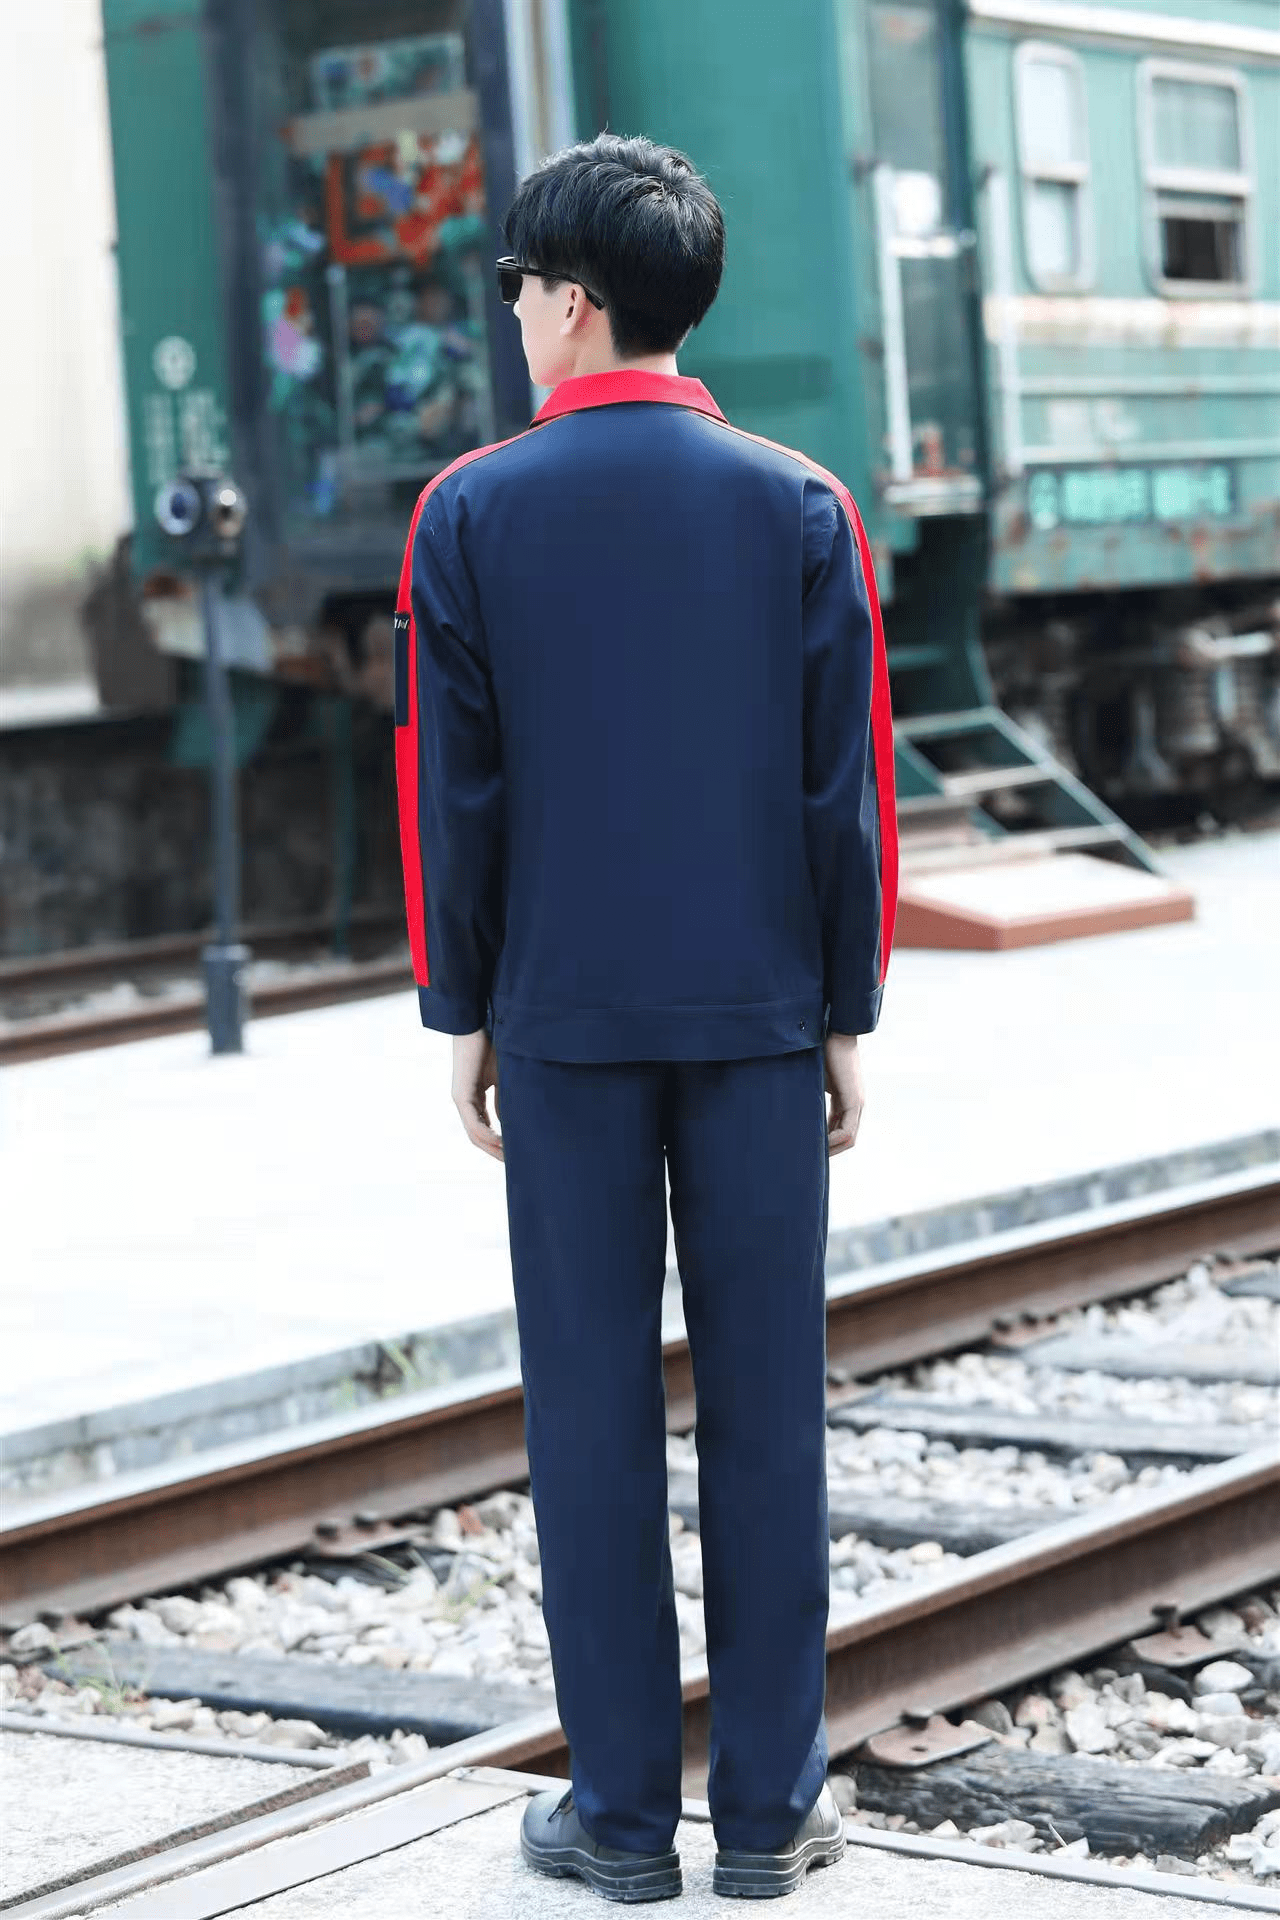 Corals Trading Co. 可樂思百貨商行 纯棉 Autumn and winter long-sleeved pure cotton series workwear SD-PC-W801